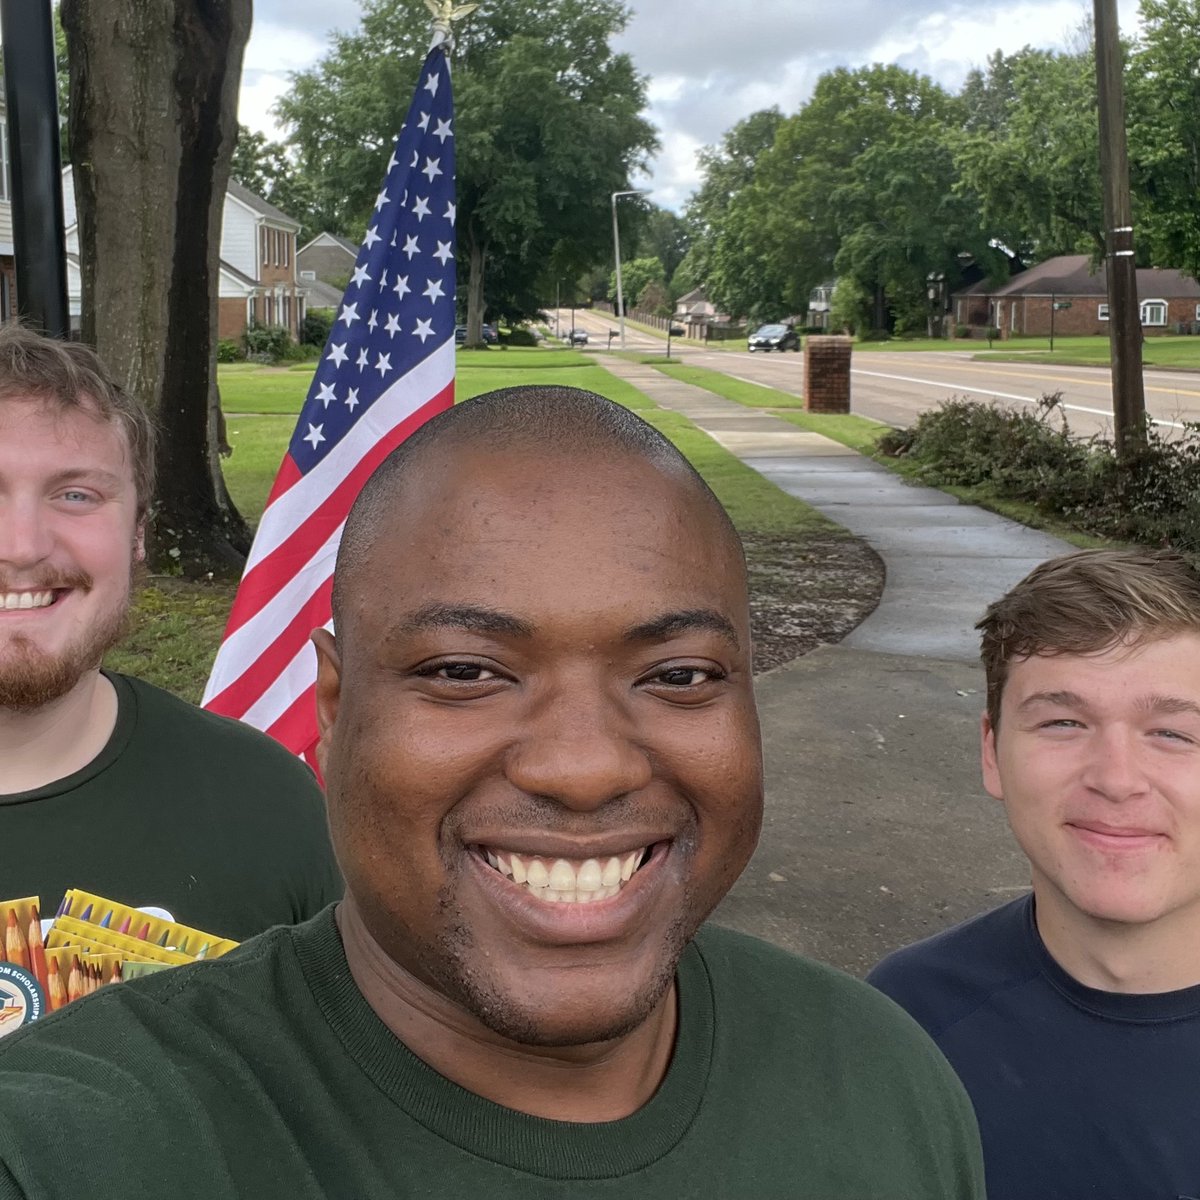 The American Dream is NOT DEAD, even in Memphis. These young men were out in the neighborhoods over the weekend talking LIFE, LIBERTY and the PURSUIT of HAPPINESS.